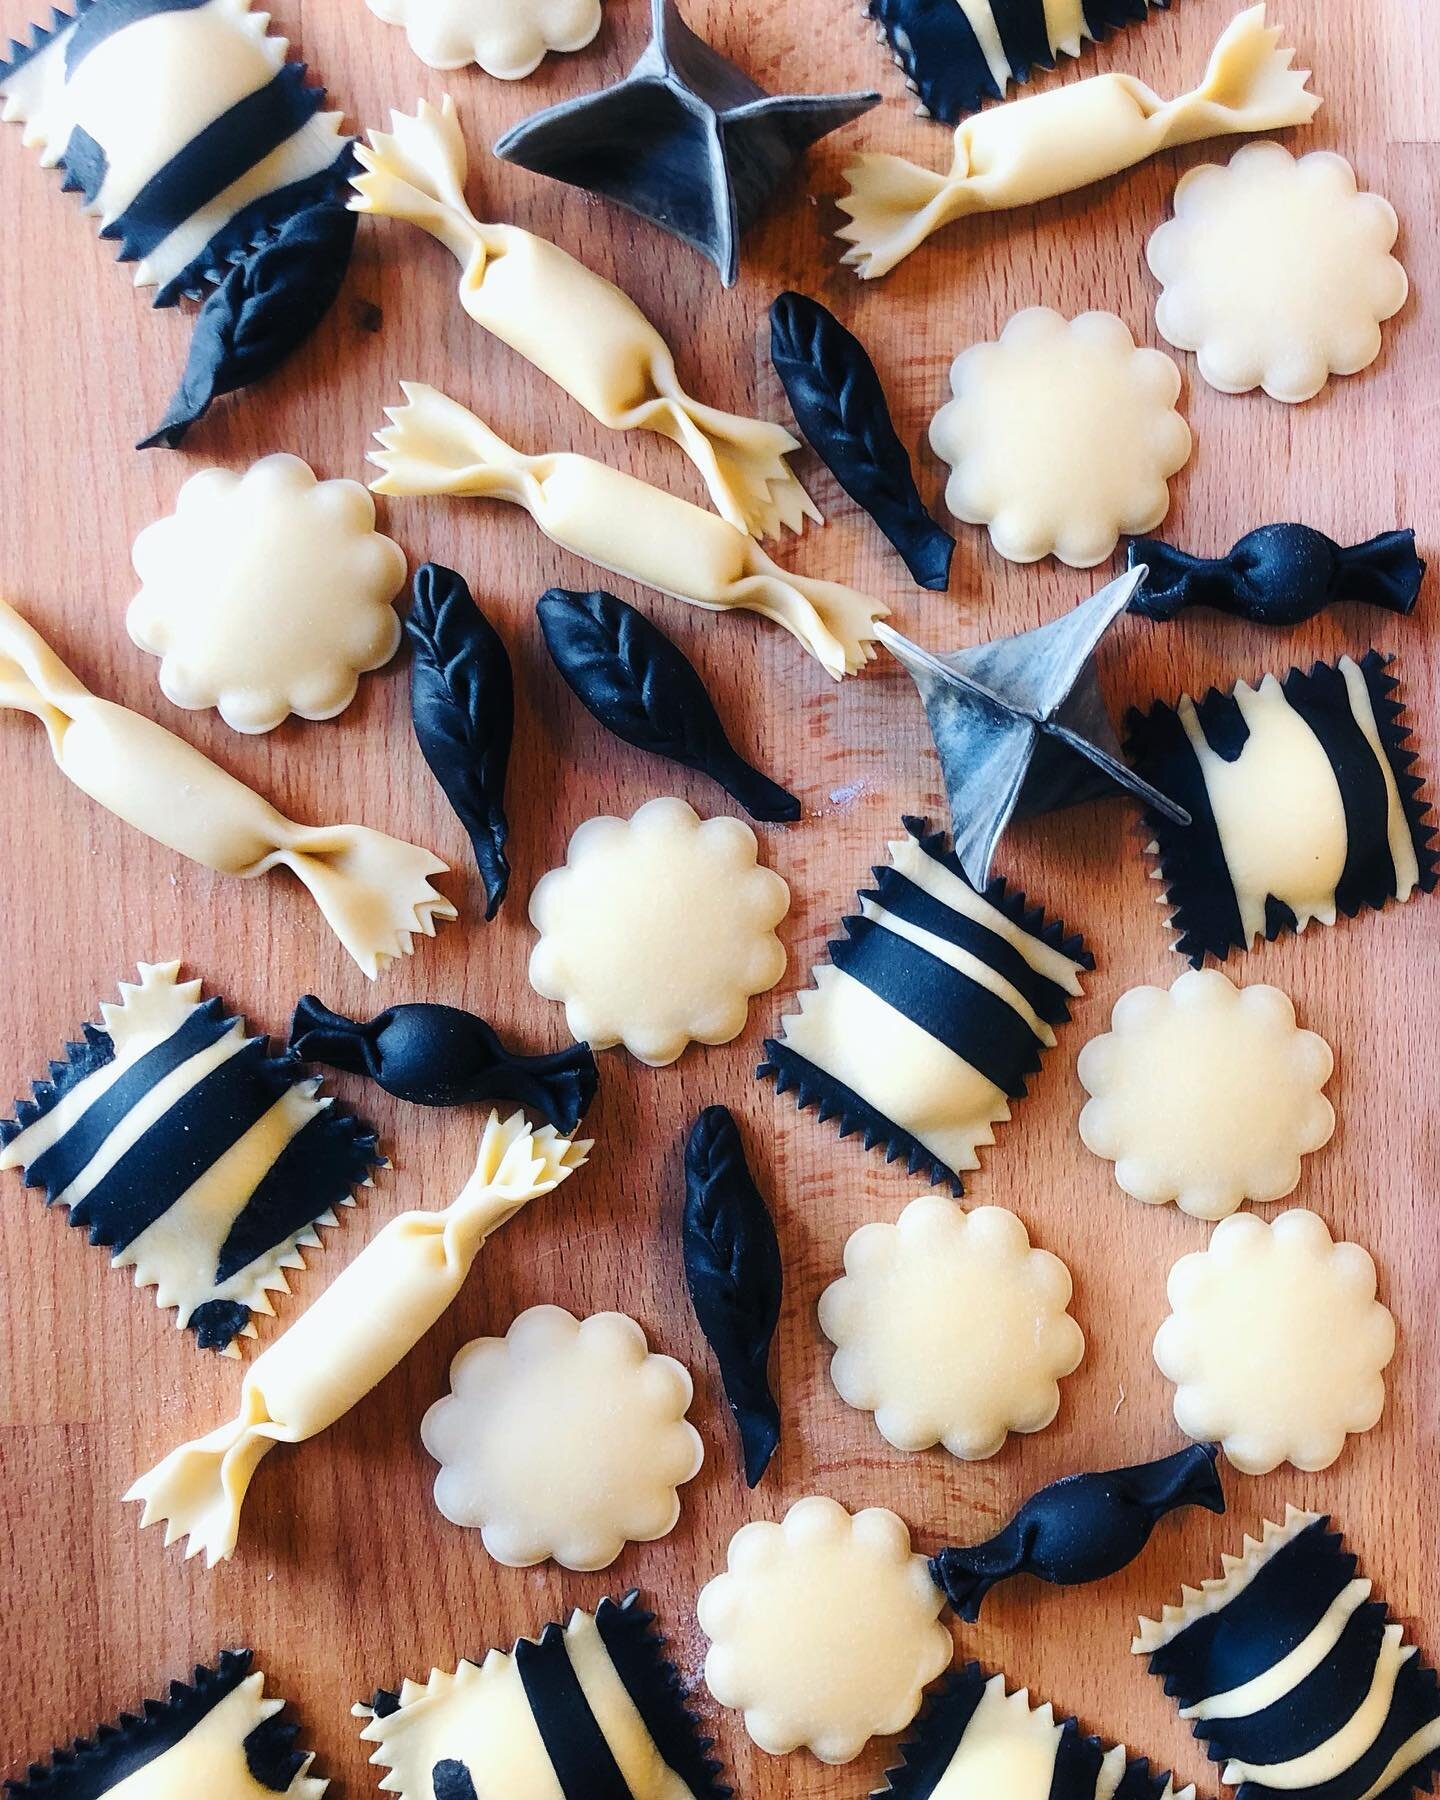 Medley of stuffed pasta shapes made from my original dough (00 flour + eggs) and my black dough (og dough + activated charcoal, about 2 tbsp is all you need for a nice sized dough boy). Traditionally, squid ink was used to dye pasta black. Truly one 